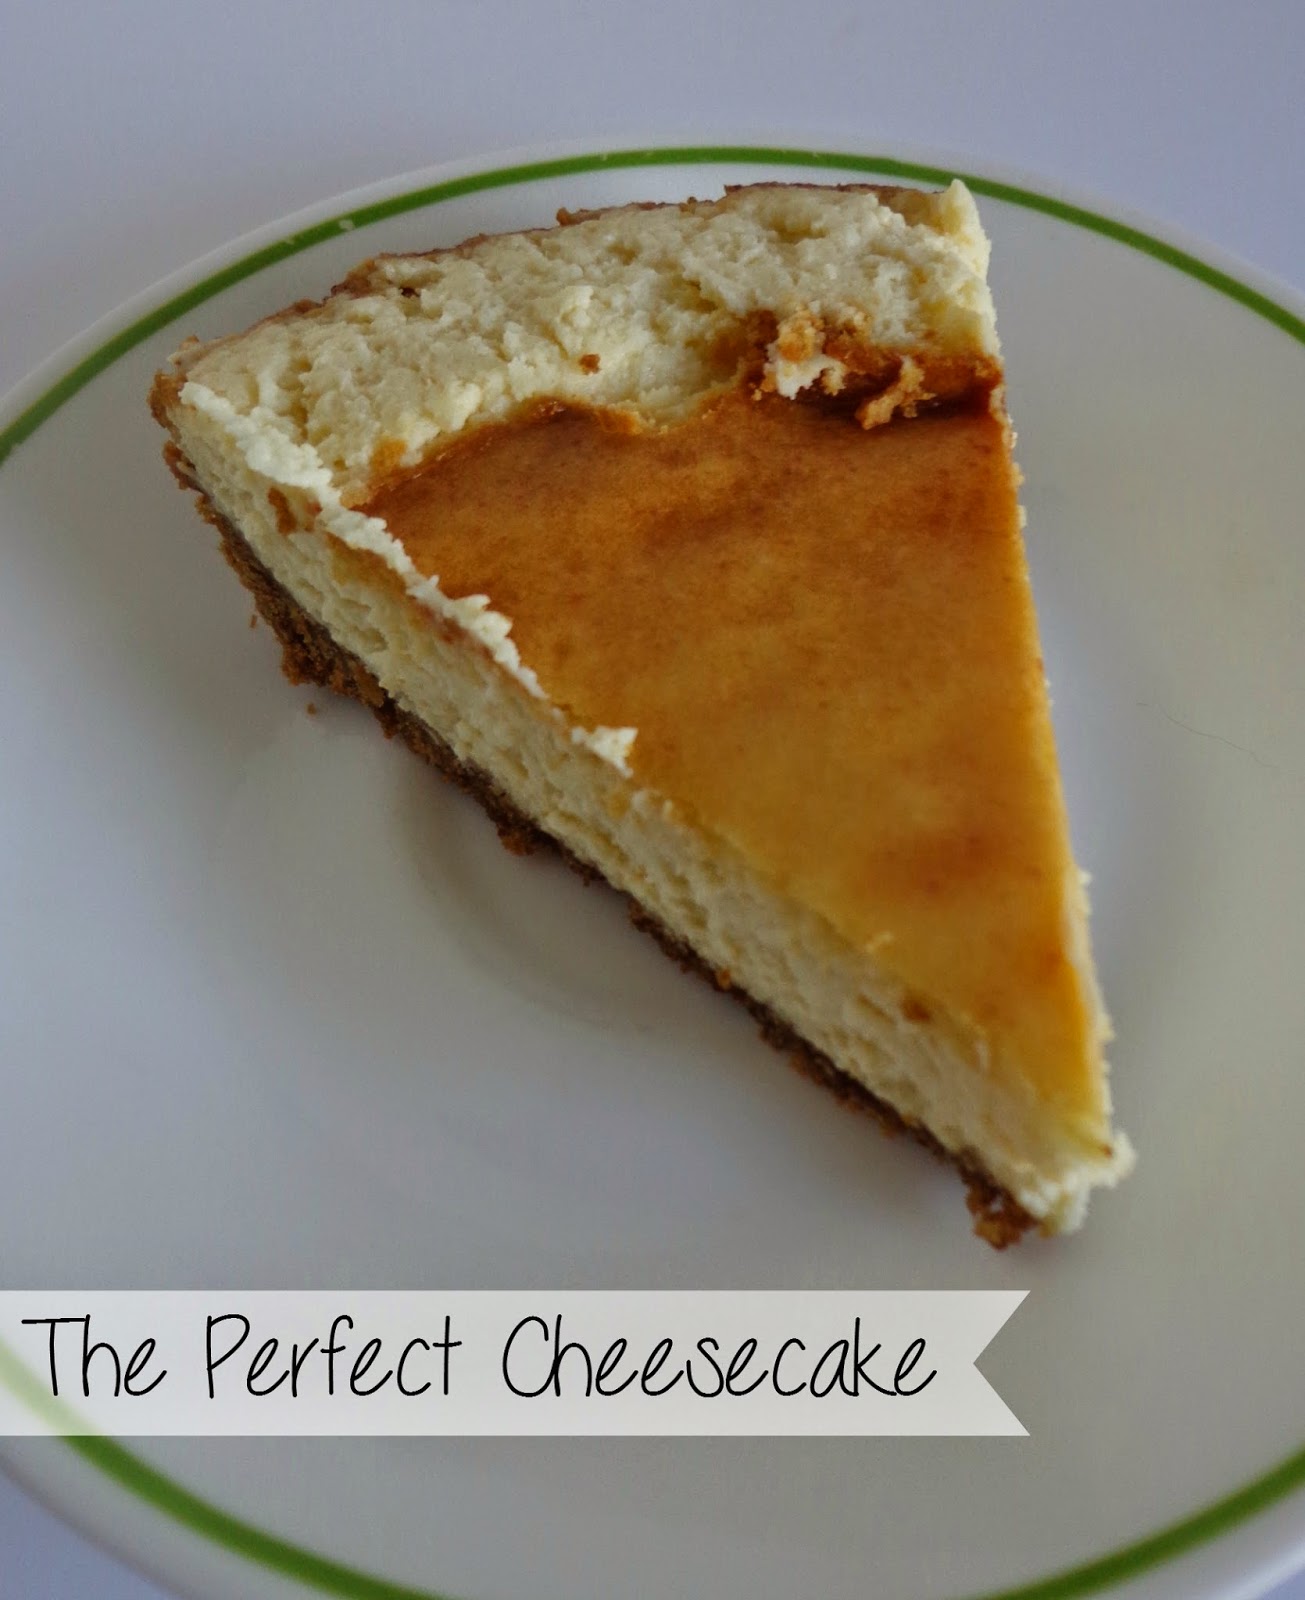 The Colbert Clan: The Perfect Cheesecake